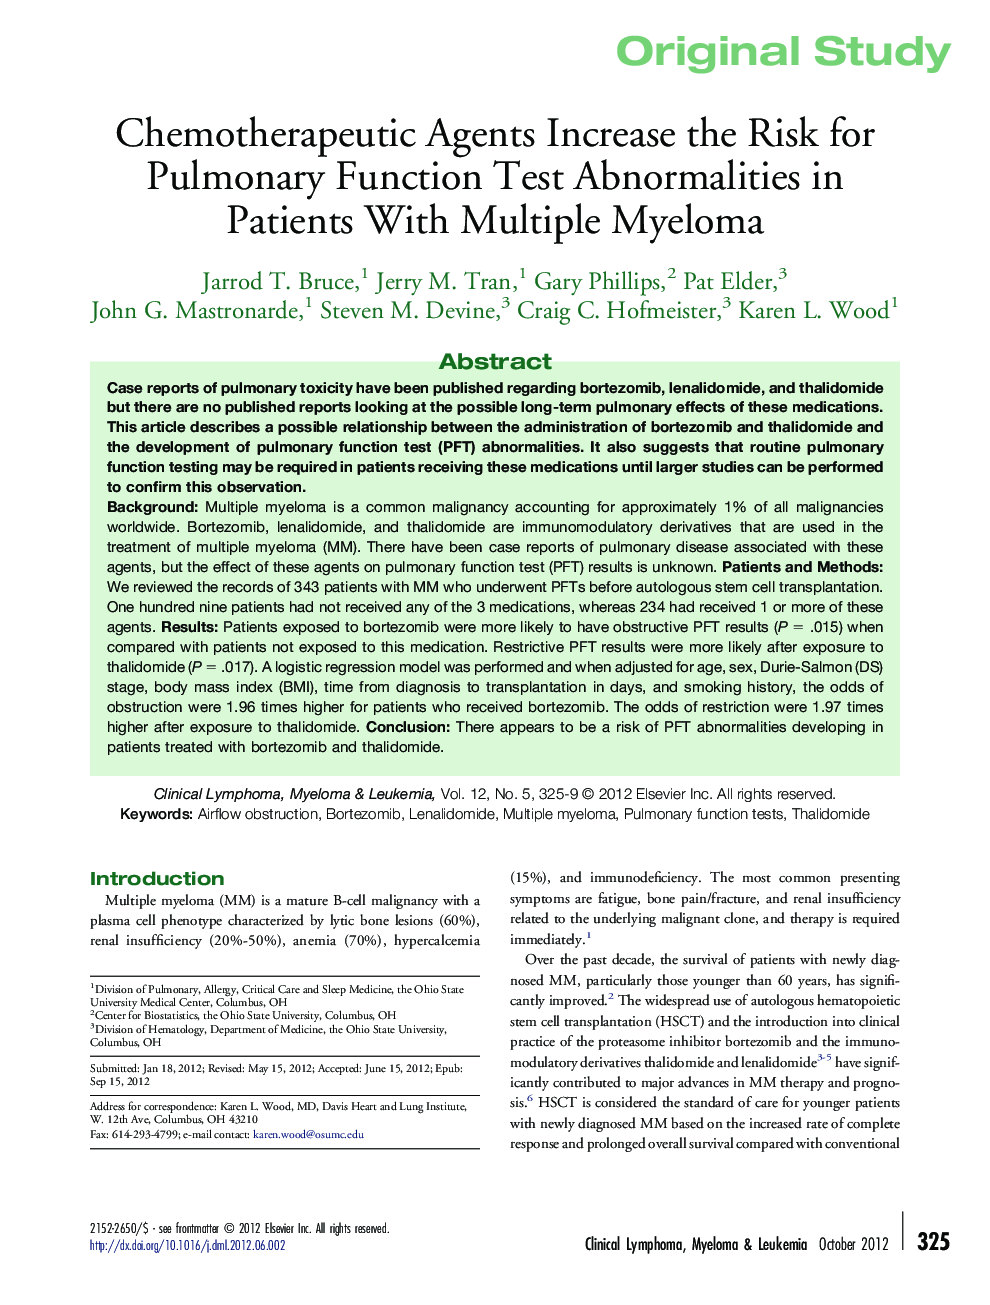 Chemotherapeutic Agents Increase the Risk for Pulmonary Function Test Abnormalities in Patients With Multiple Myeloma